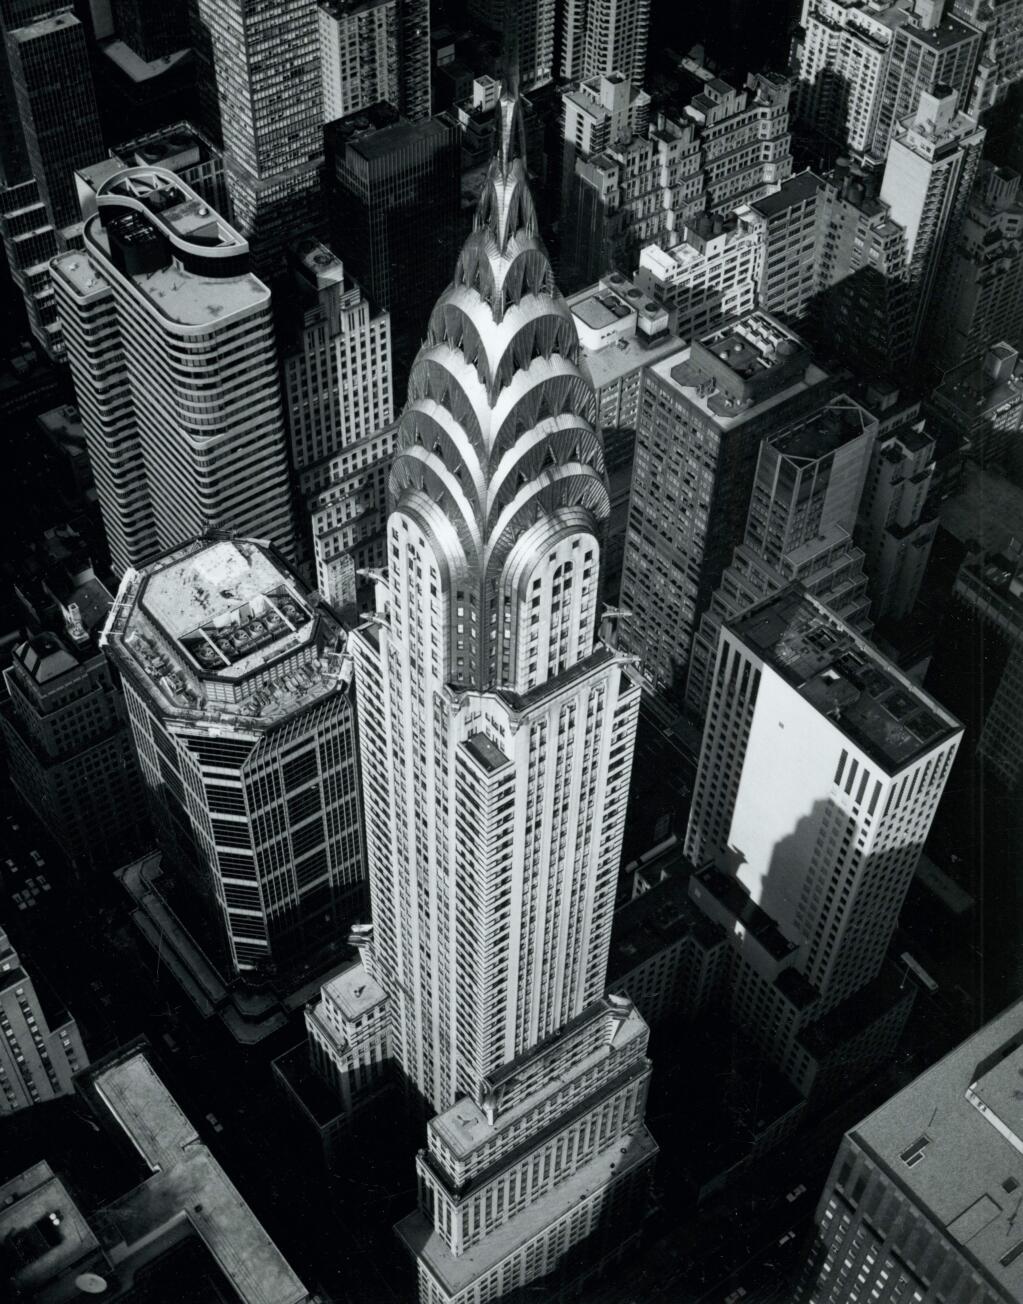 New York photographer Marilyn Bridges' 1988 photo of the Chrysler Building is part of Sonoma State's '40 by 40' exhibit. (MARILYN BRIDGES)